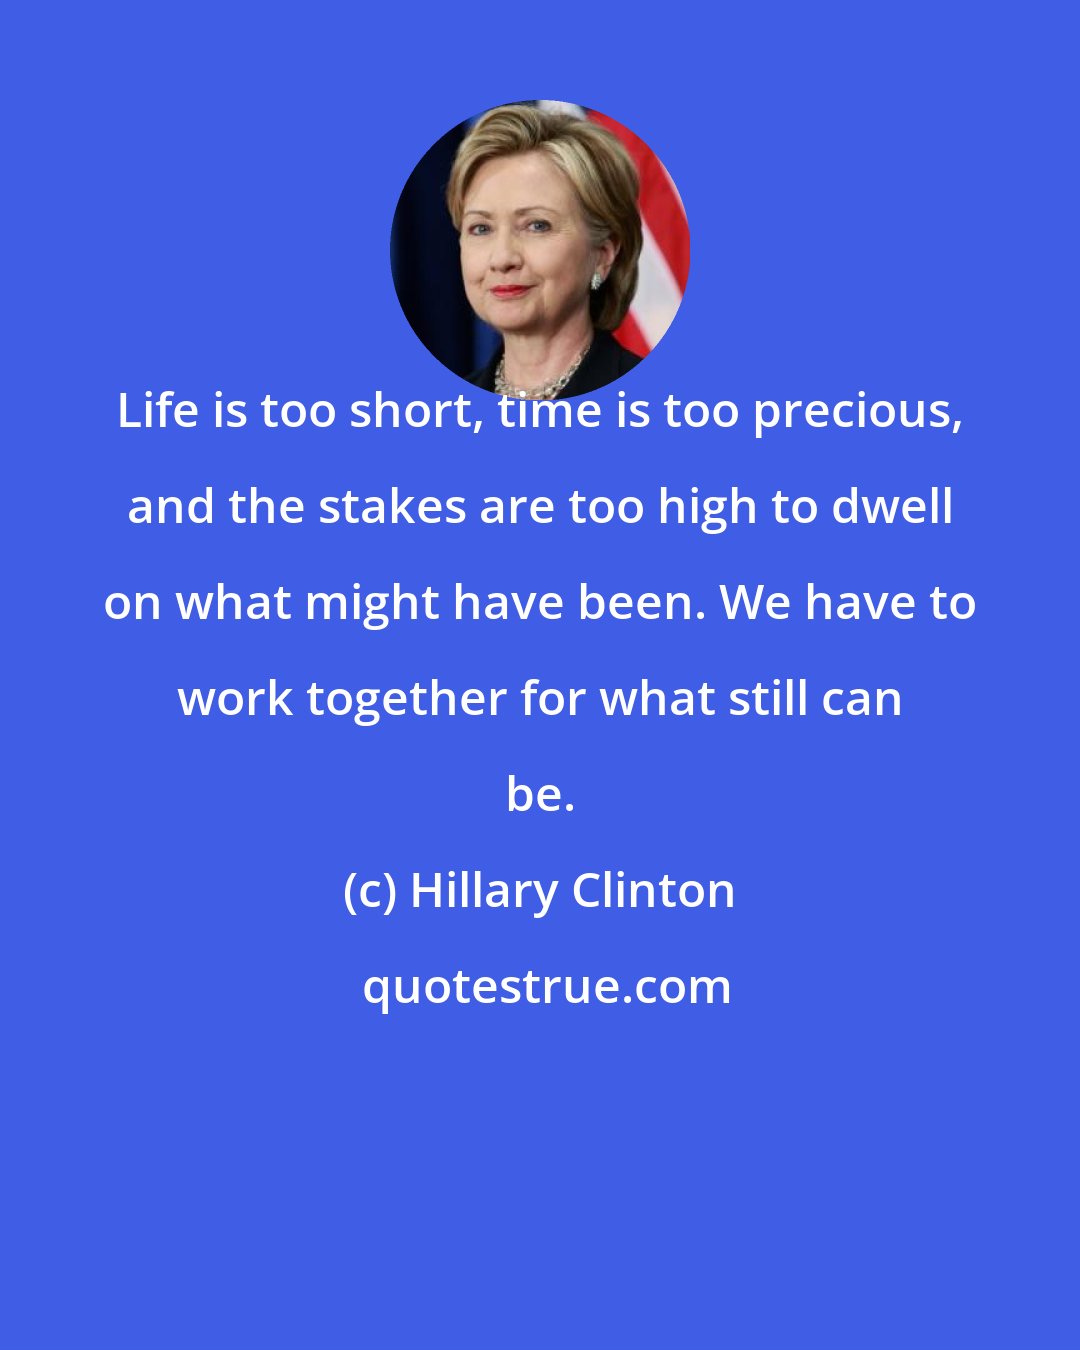 Hillary Clinton: Life is too short, time is too precious, and the stakes are too high to dwell on what might have been. We have to work together for what still can be.